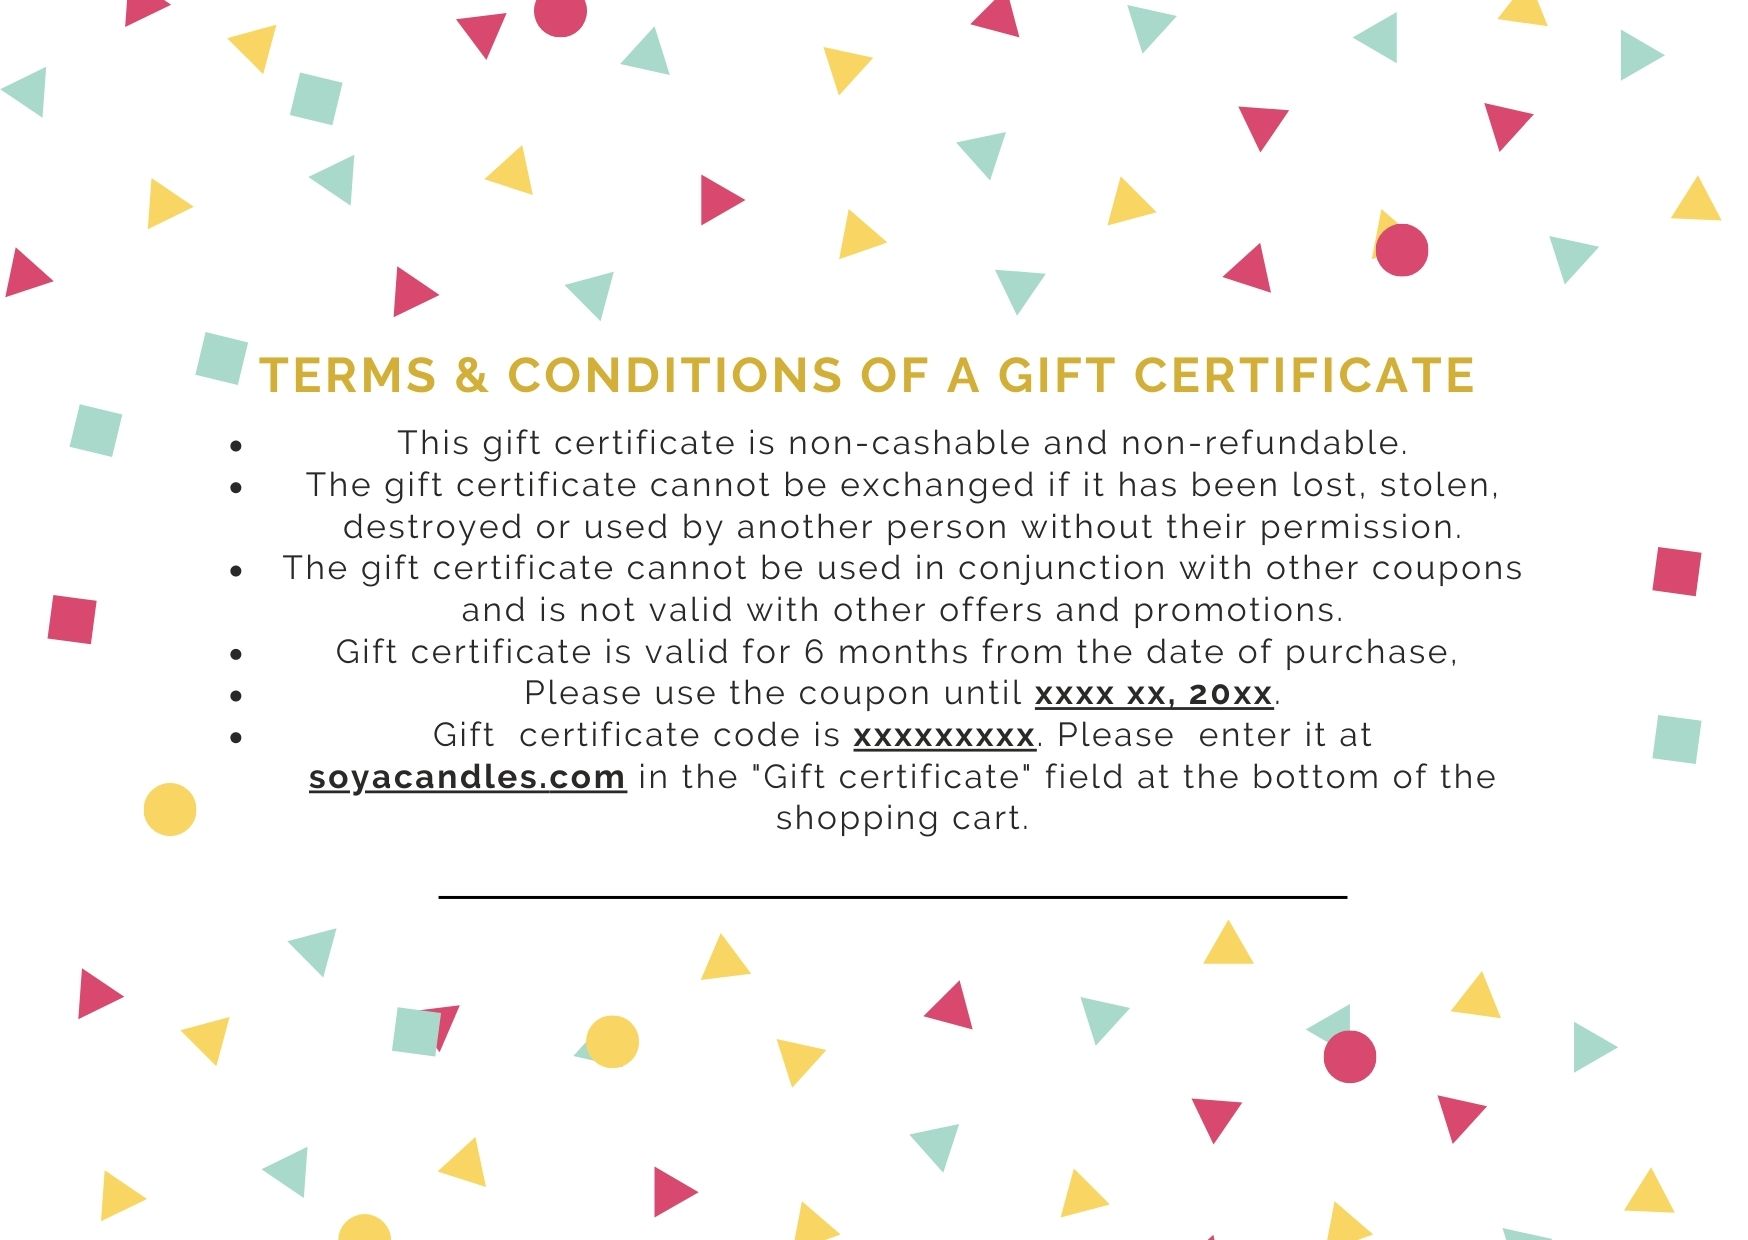 Gift sertificate from soyacandles.com